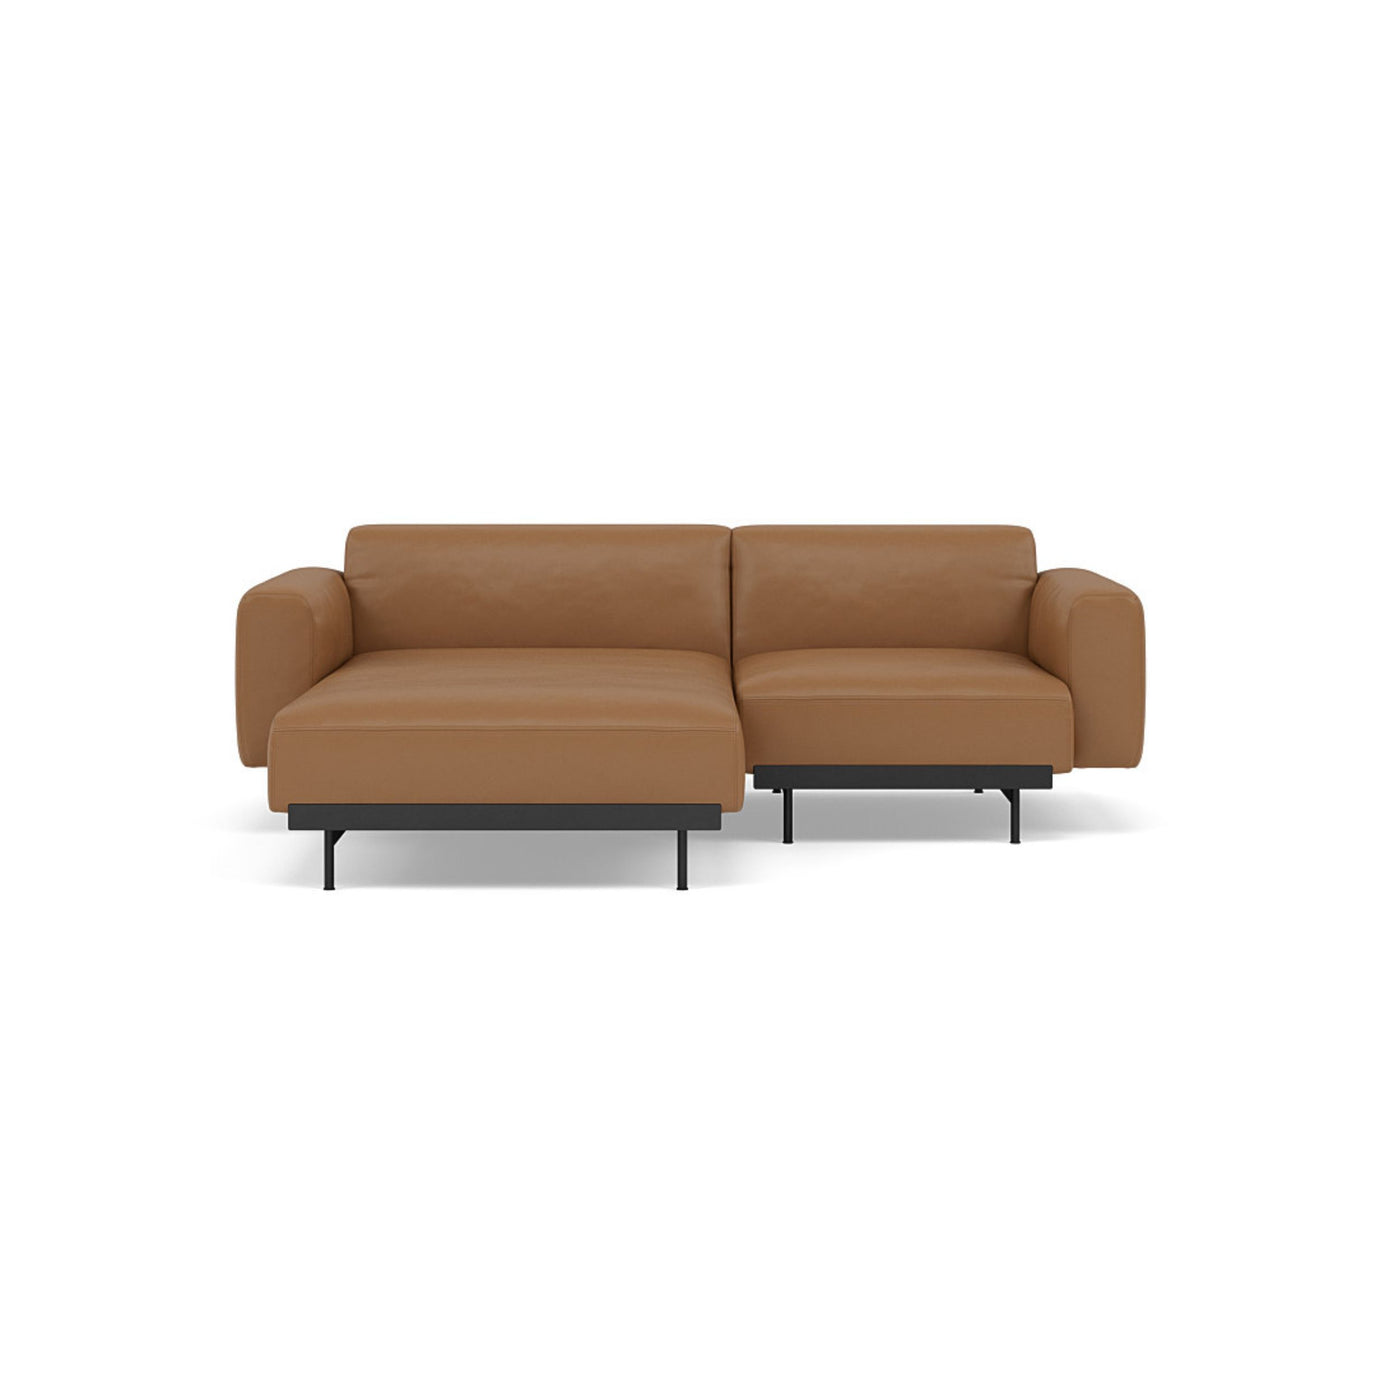 Muuto In Situ 2 Seater sofa in configuration 5. Made to order from someday designs. #colour_cognac-refine-leather